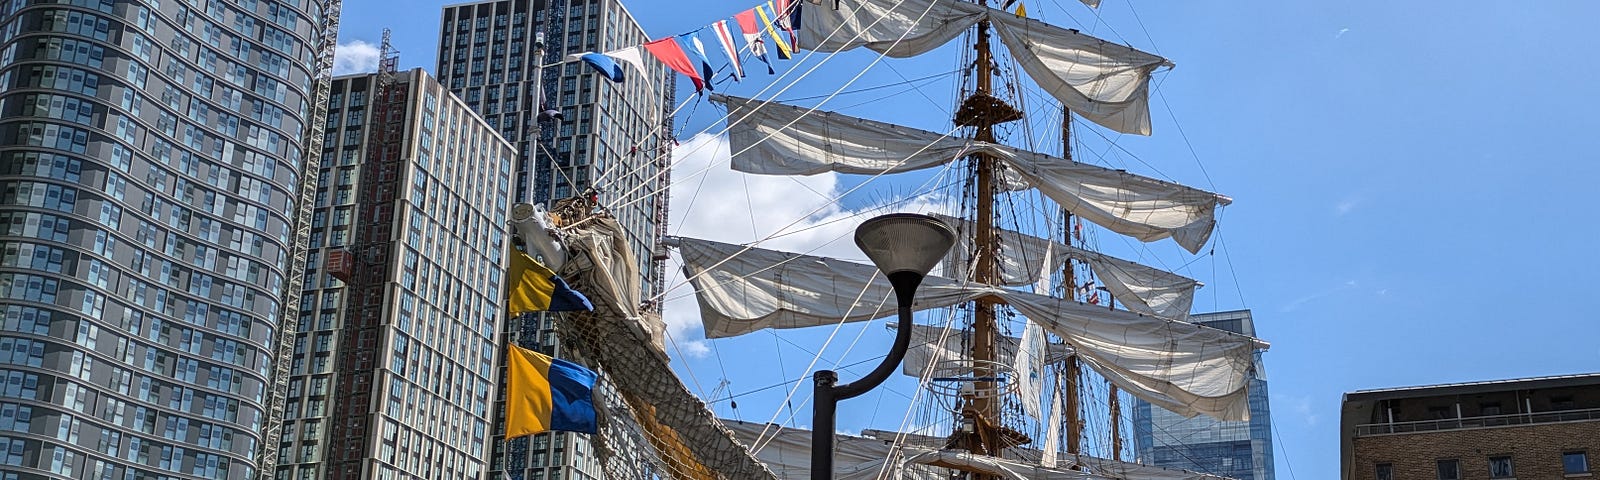 tall ship with tied-up sails in a dock with high-rise buildings covered in windows in background